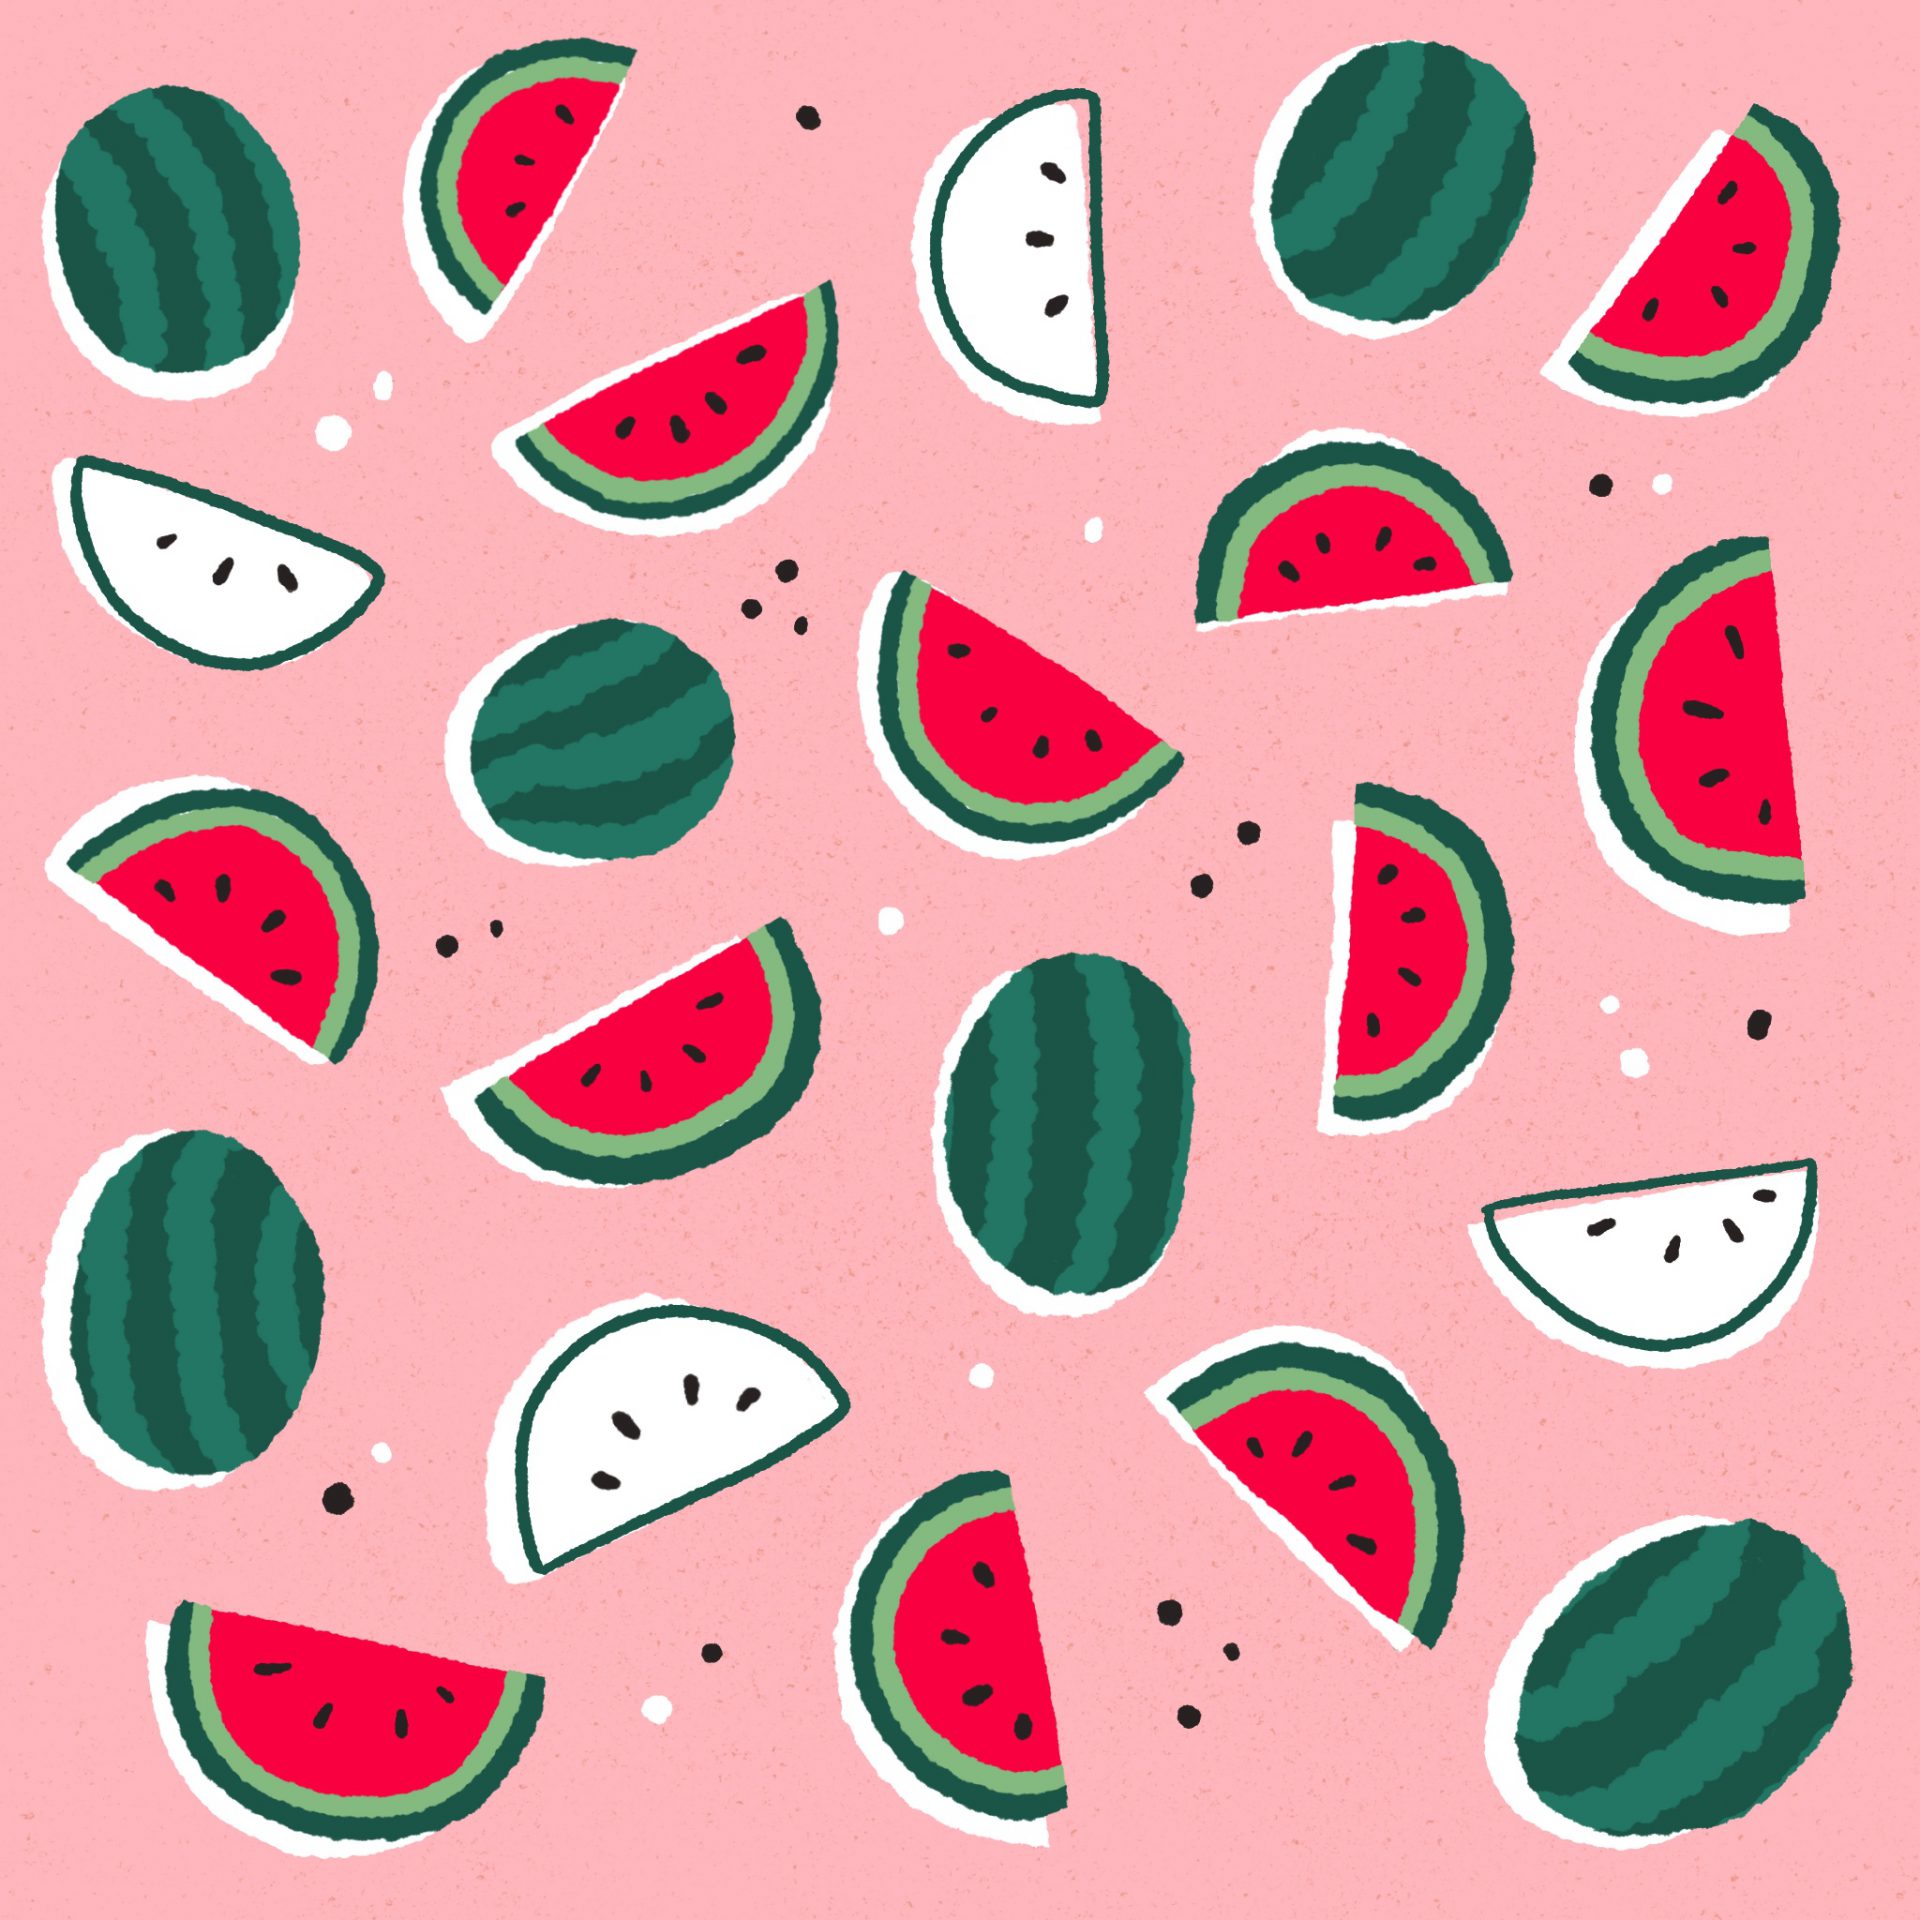 An illustrated pattern of watermelon